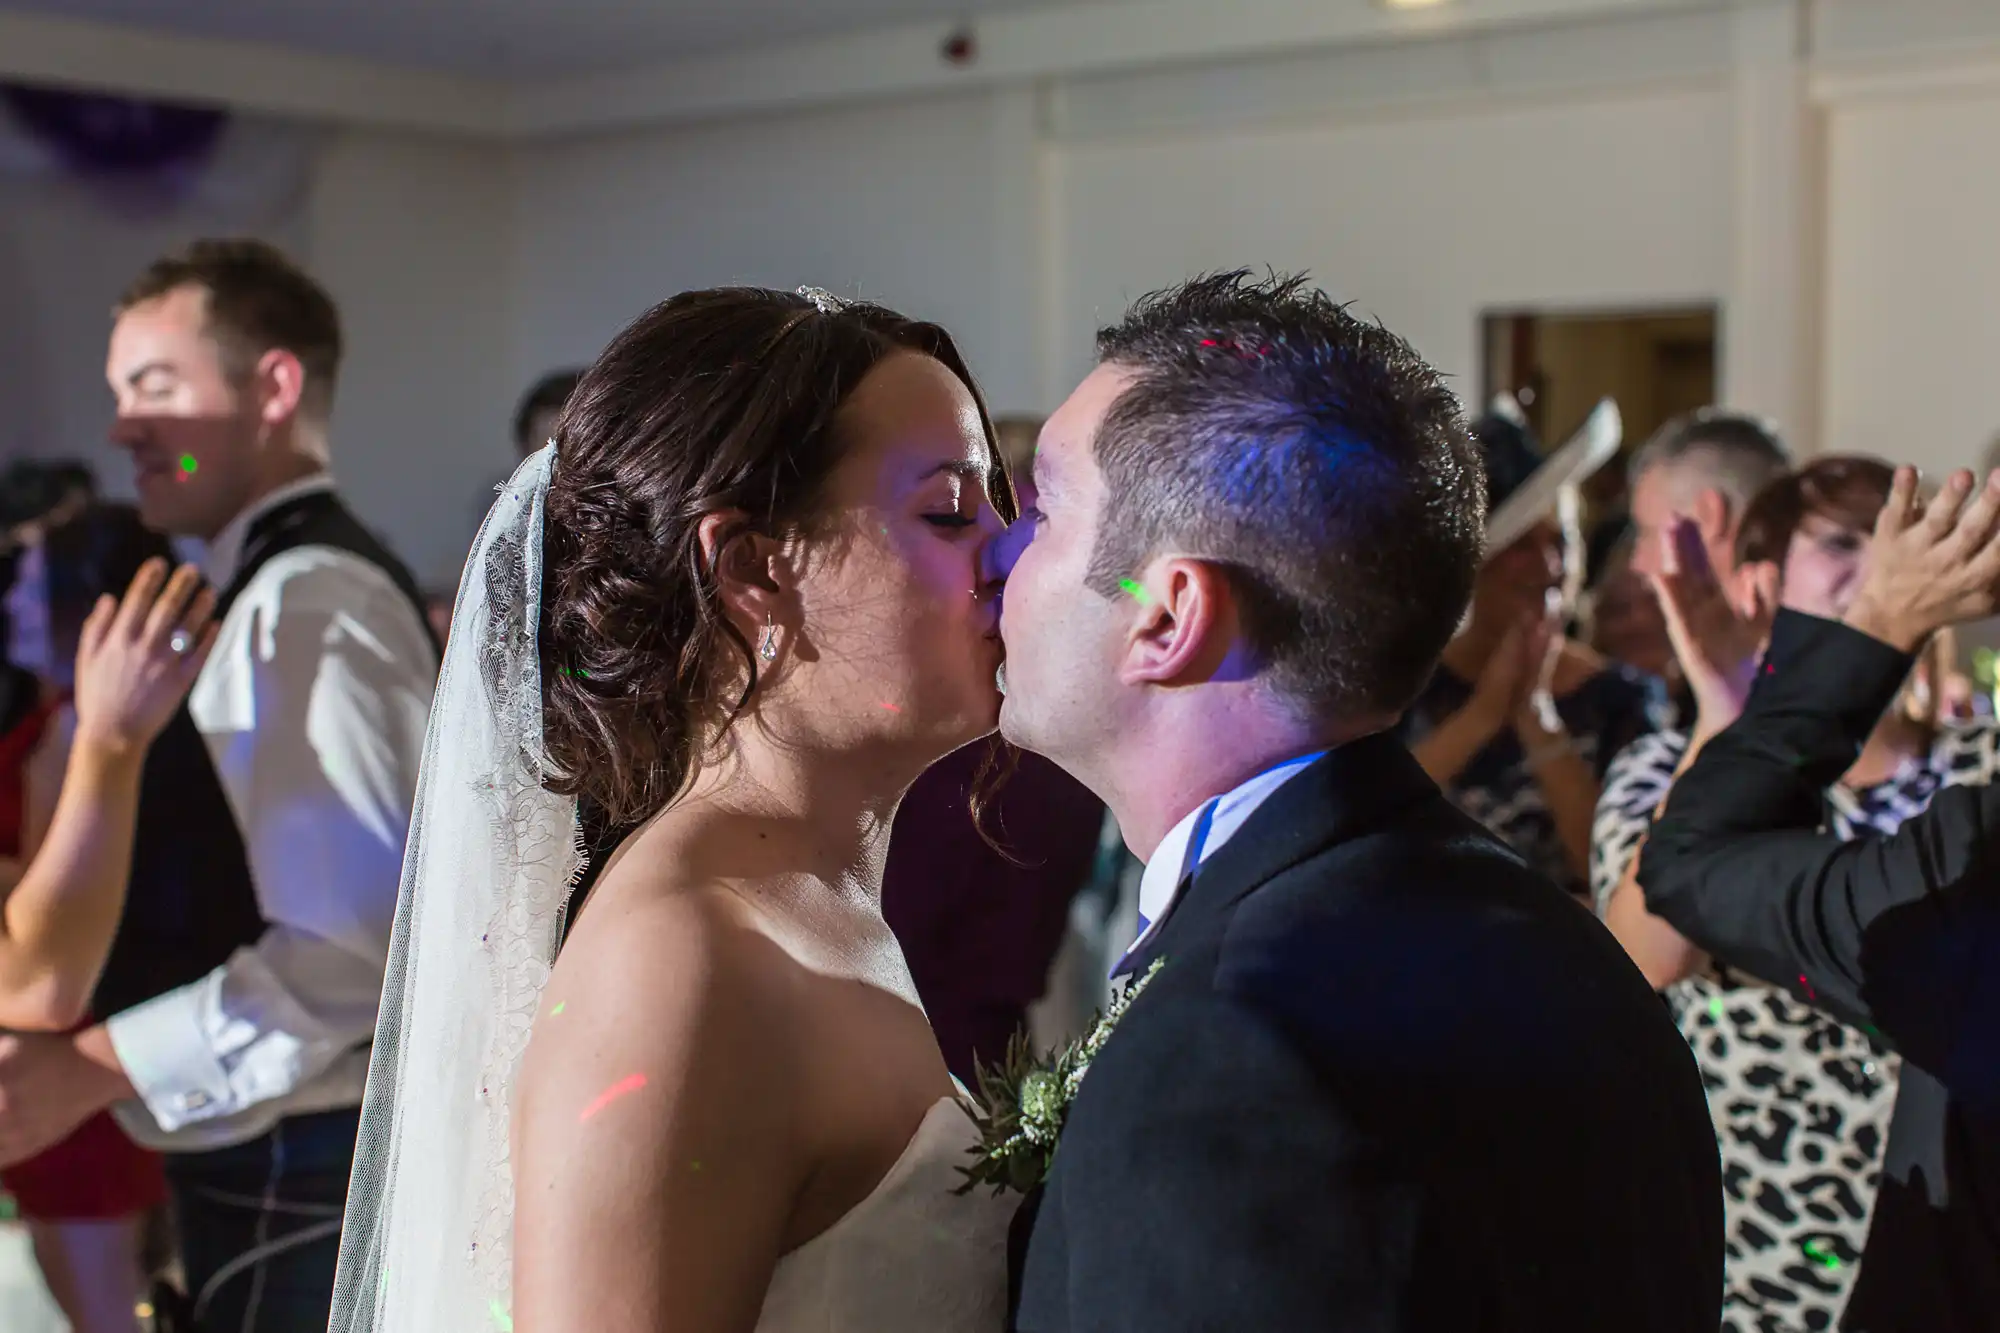 A bride and groom kiss on the dance floor surrounded by clapping guests during a wedding reception.